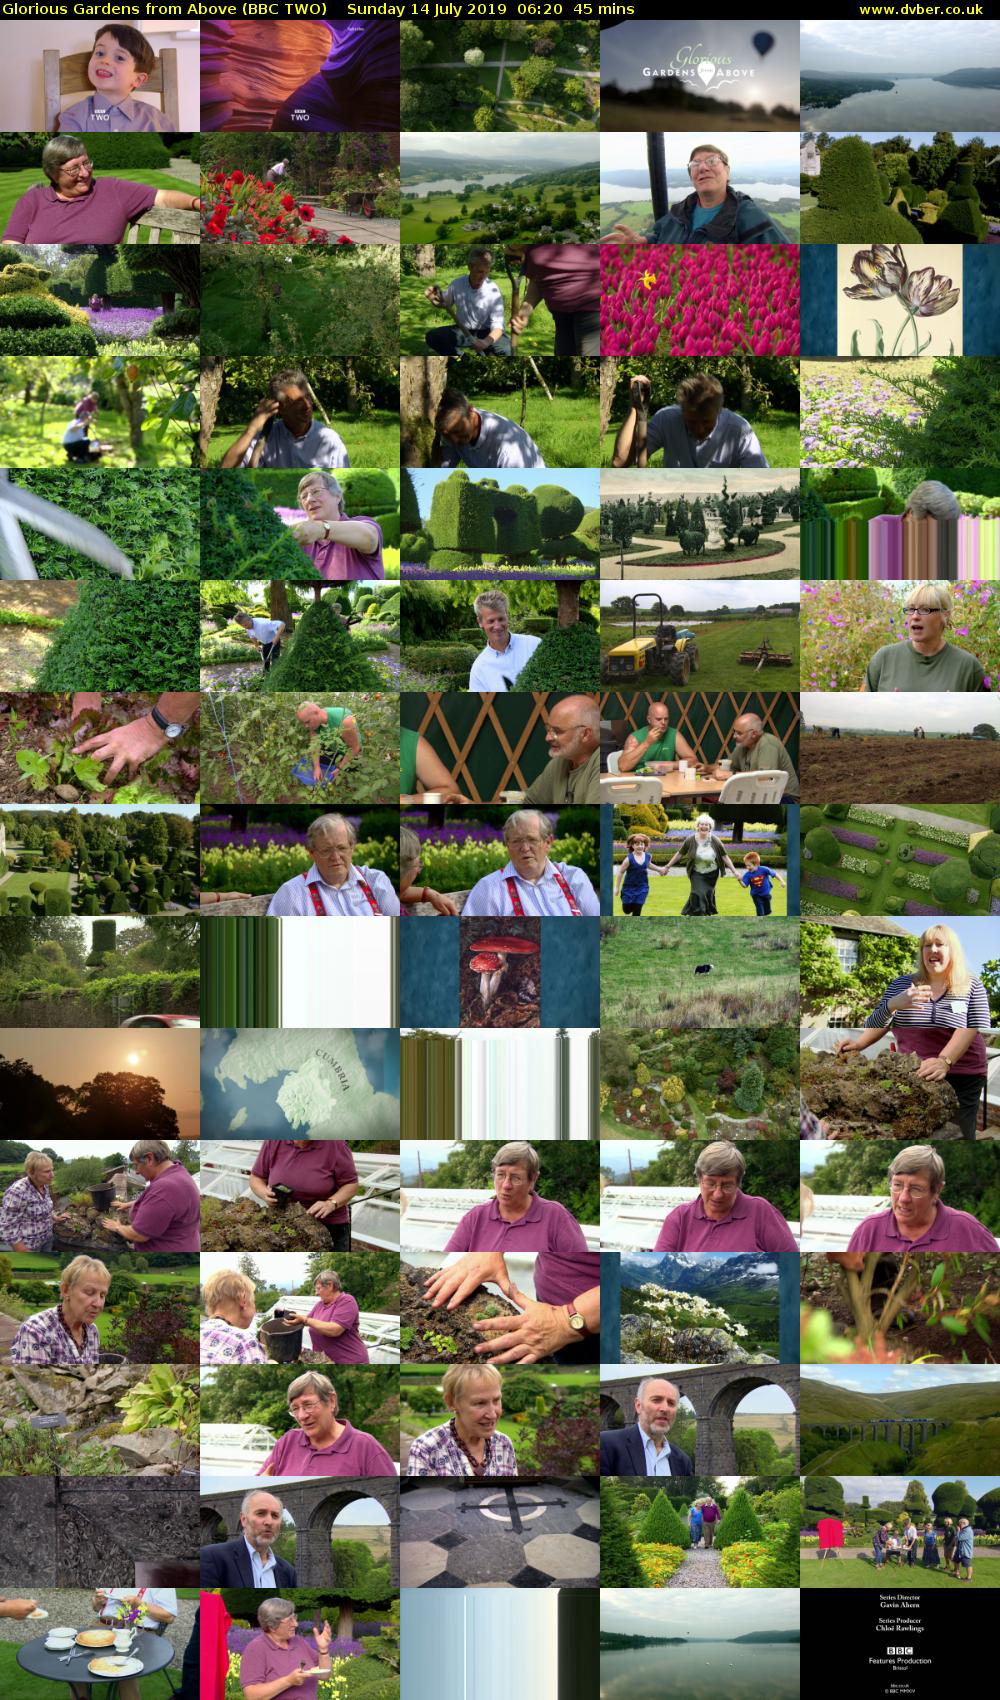 Glorious Gardens from Above (BBC TWO) Sunday 14 July 2019 06:20 - 07:05